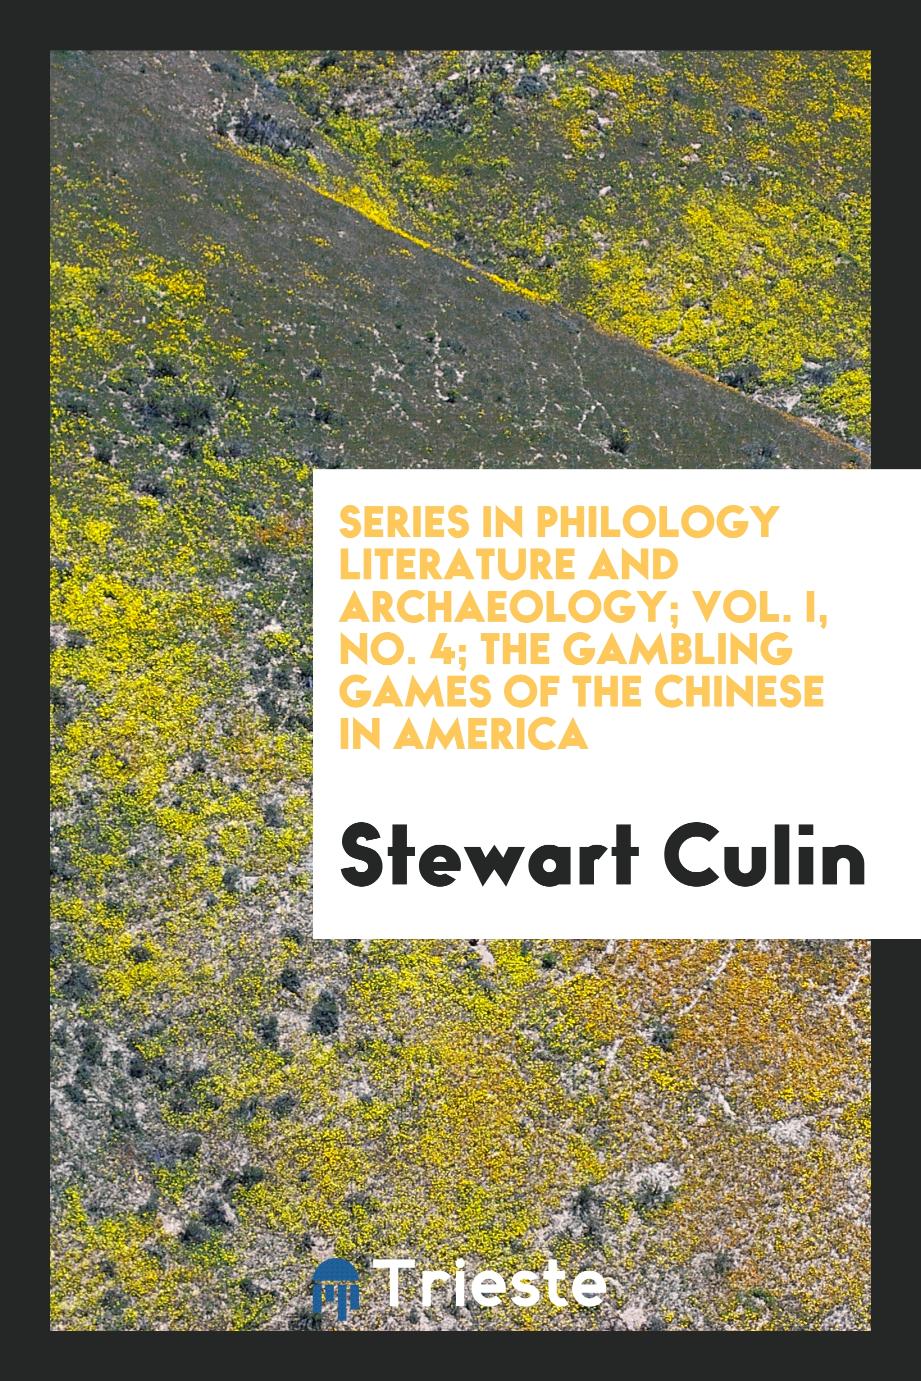 Series in Philology Literature and Archaeology; Vol. I, No. 4; The gambling games of the Chinese in America